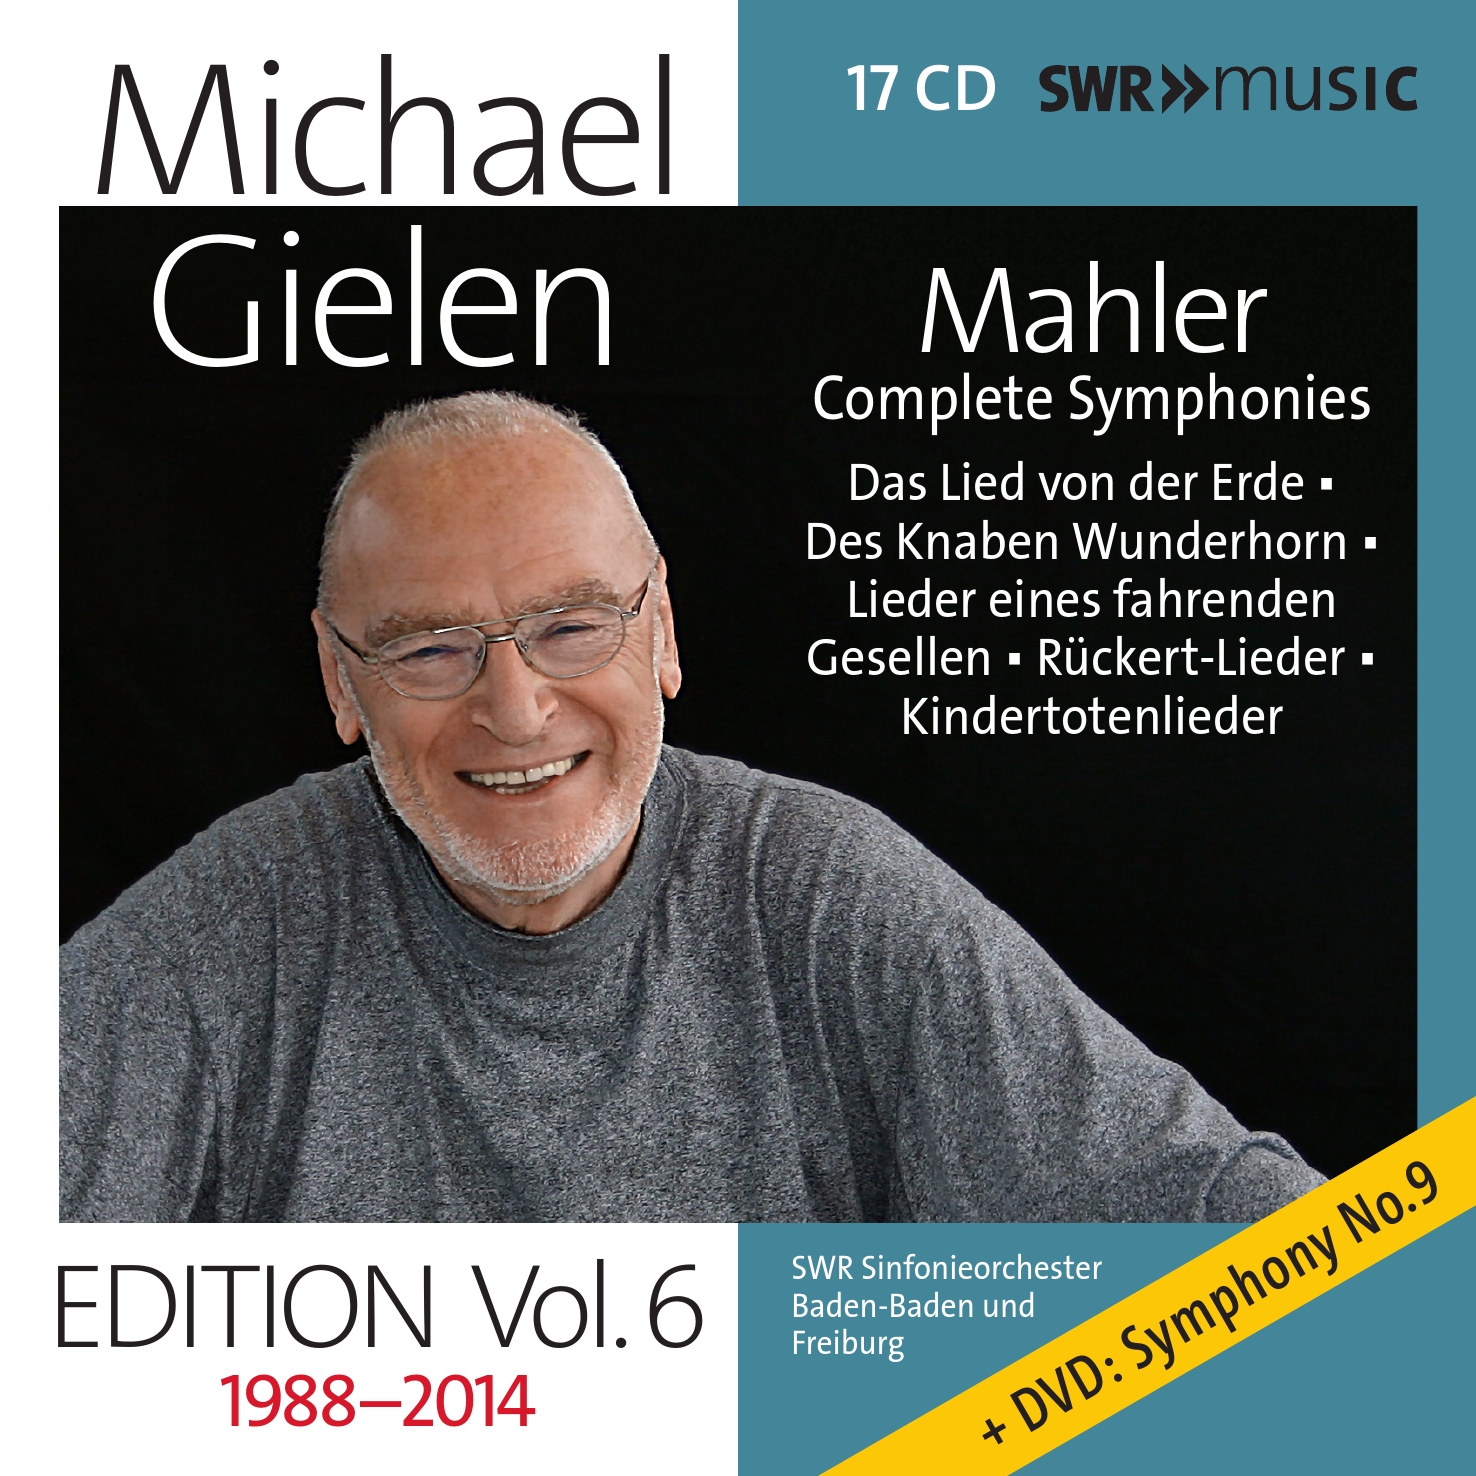 Michael Gielen Ed - Vol 6 Mahler Symphonies and. Song Cycles Recorded 1988-2014 cd07